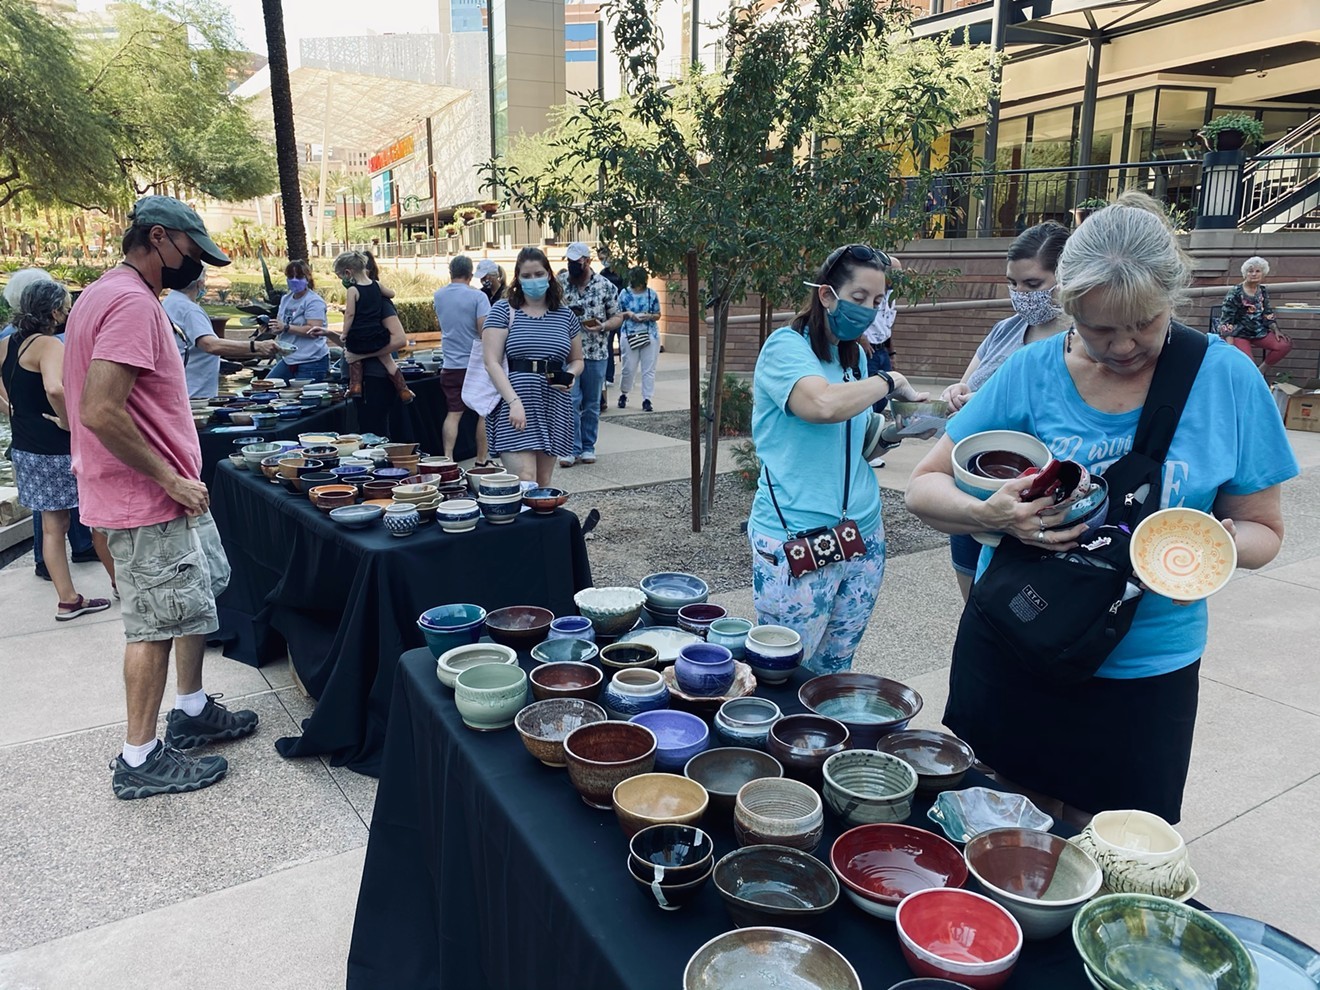 The Empty Bowls event in 2021 sold over 900 bowls.